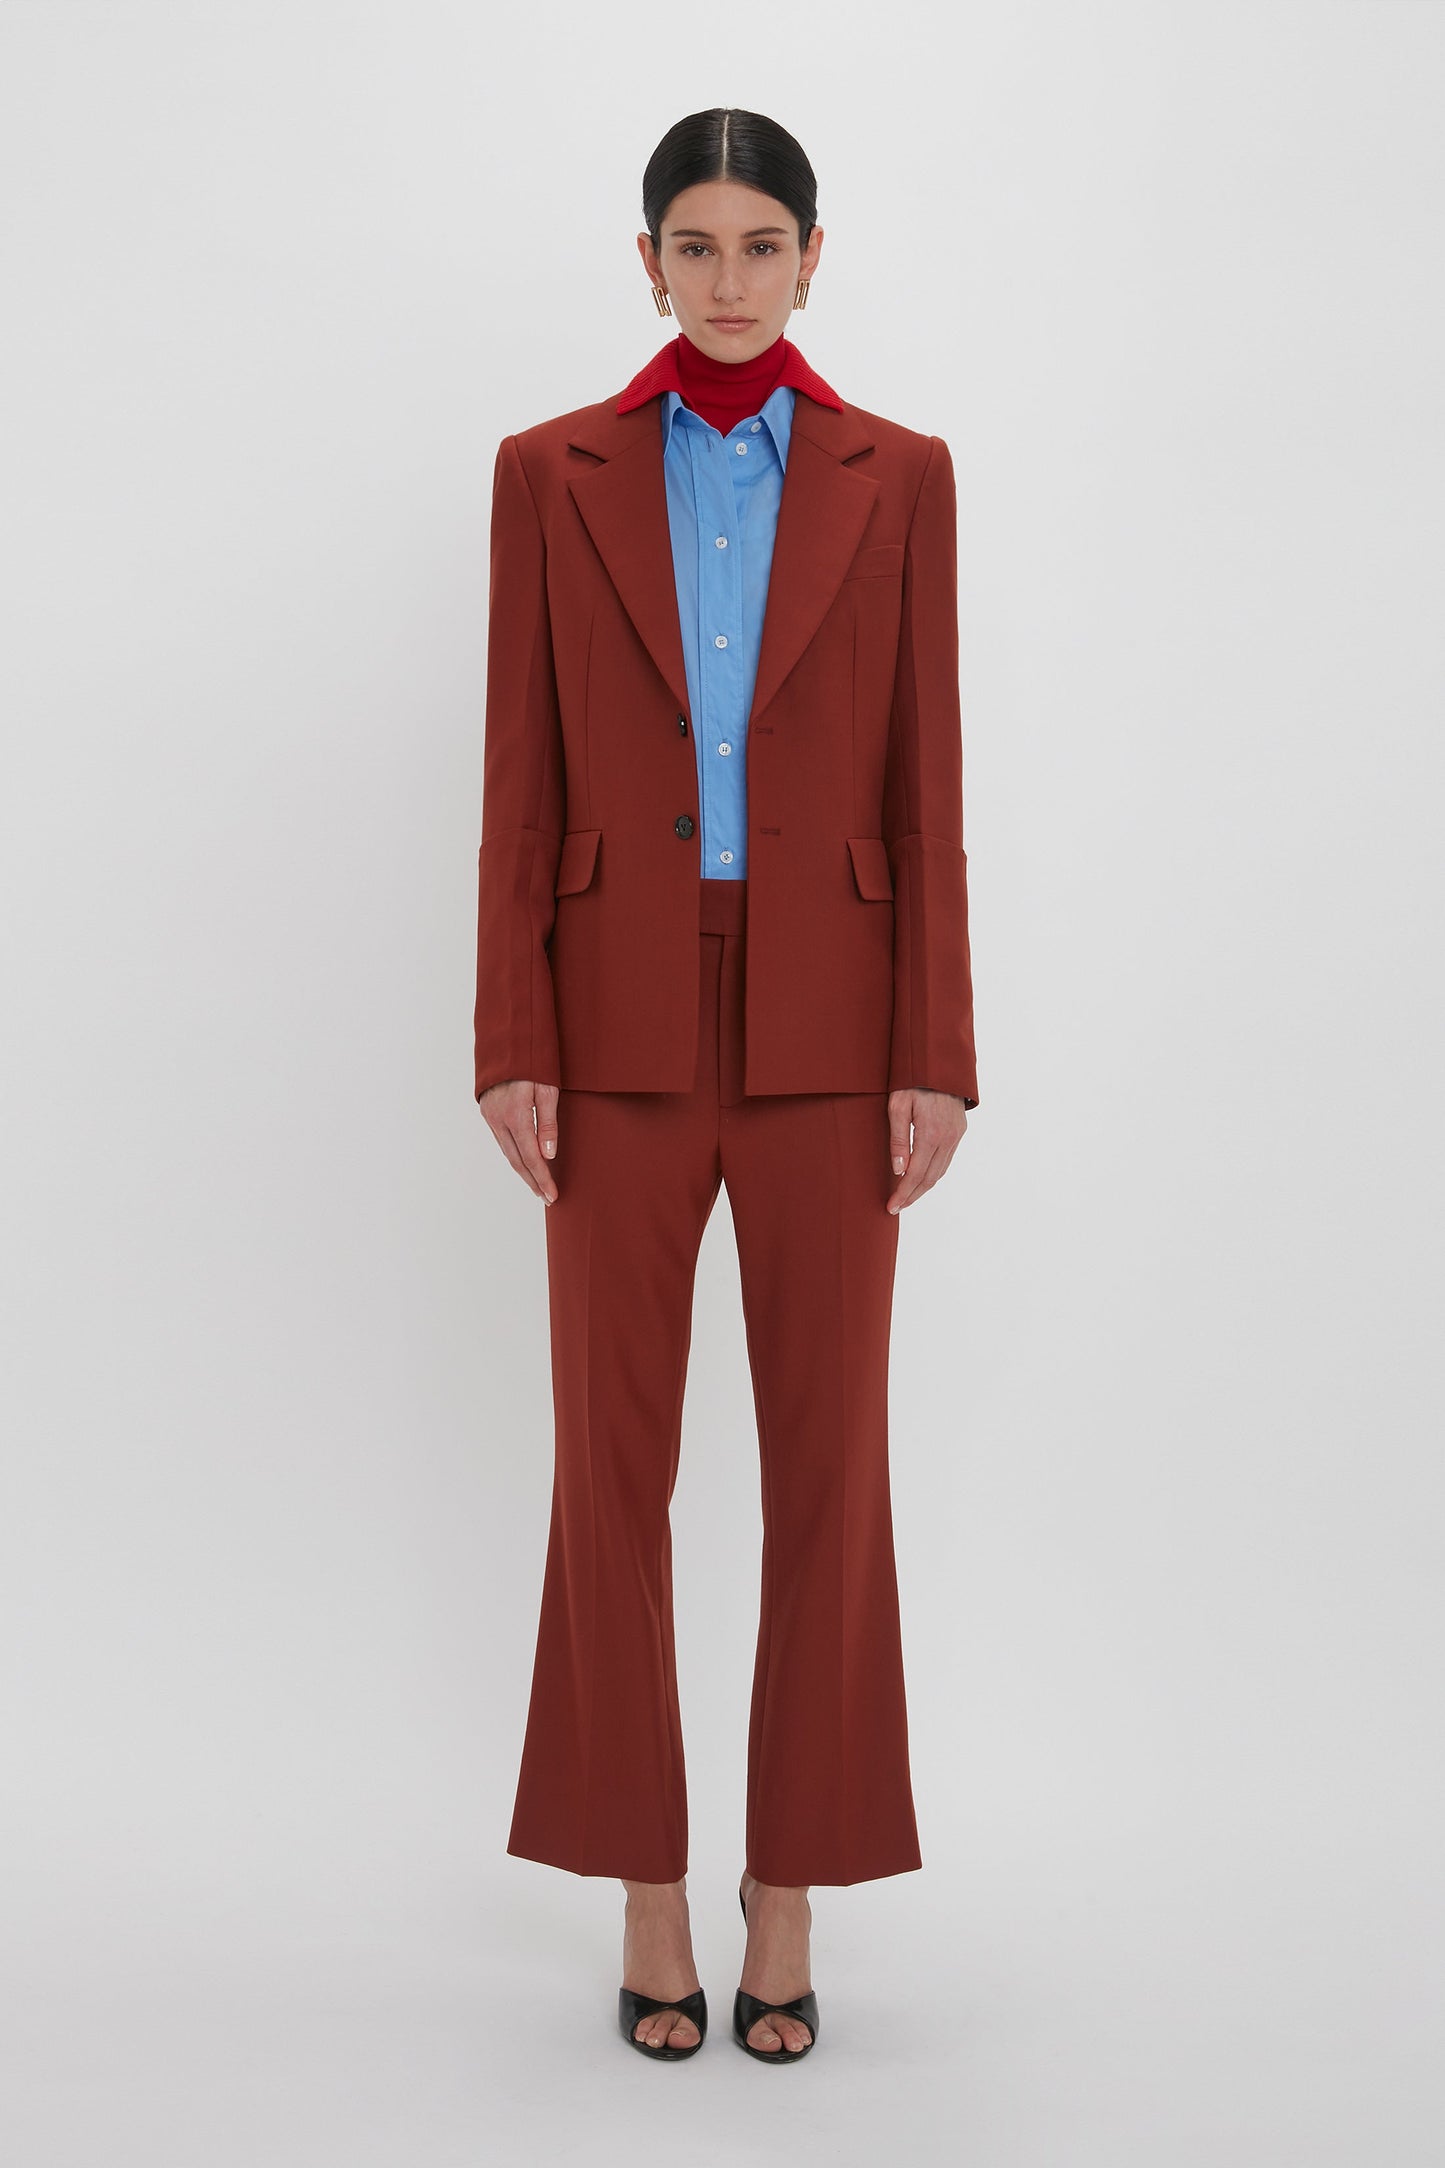 A person stands against a plain white background wearing the Victoria Beckham Sleeve Detail Patch Pocket Jacket In Russet, coupled with a blue shirt, red scarf, and black heeled sandals.